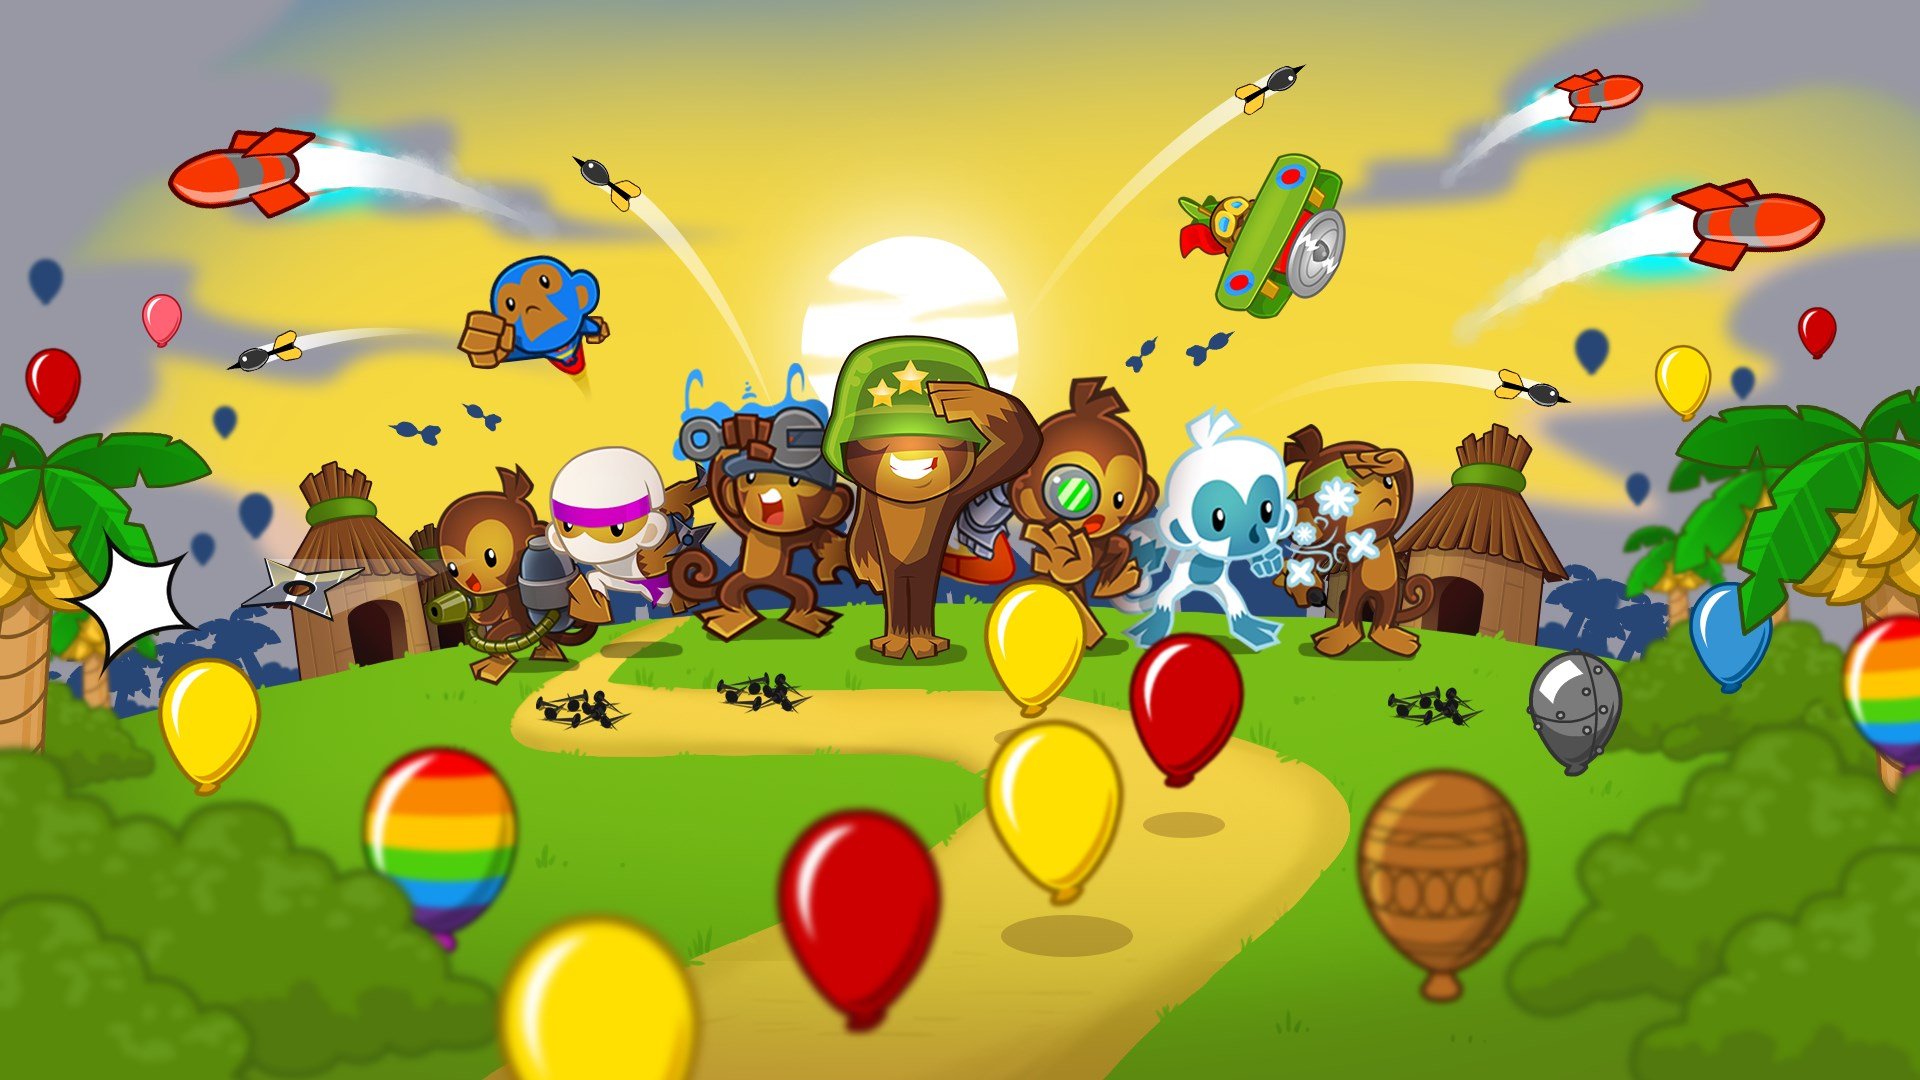 Bloons TD 5 cover image